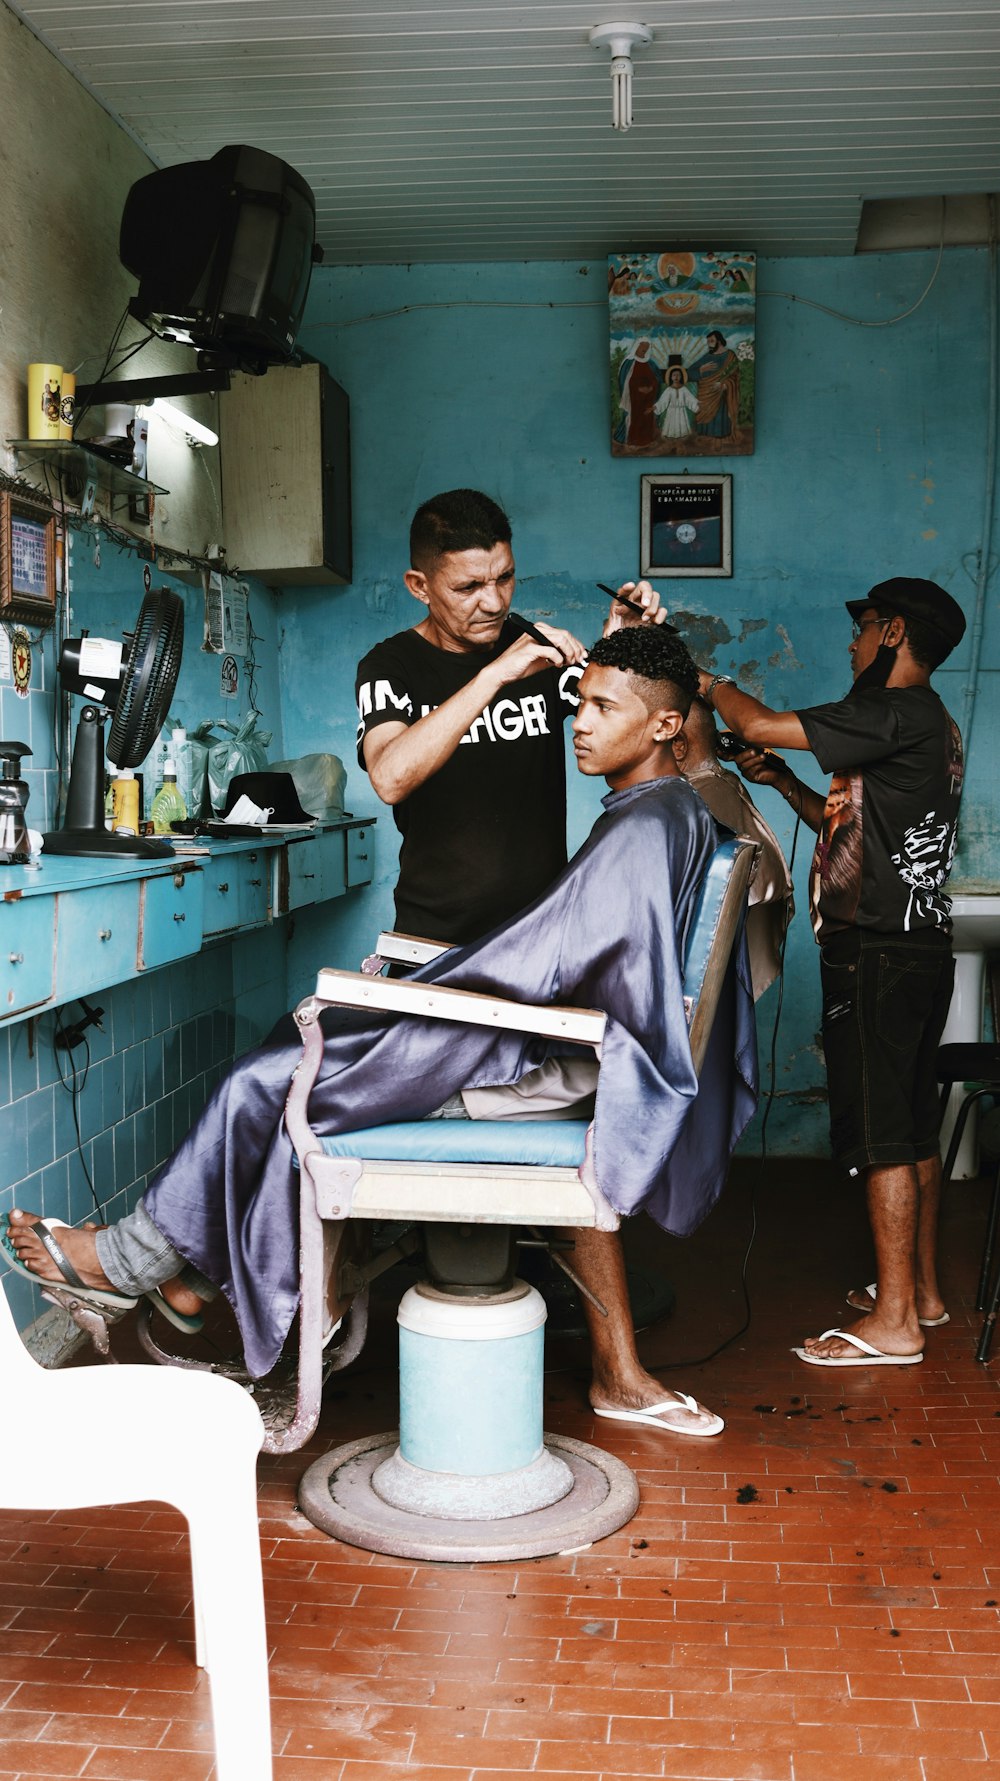 man in black t-shirt sitting on barber chair